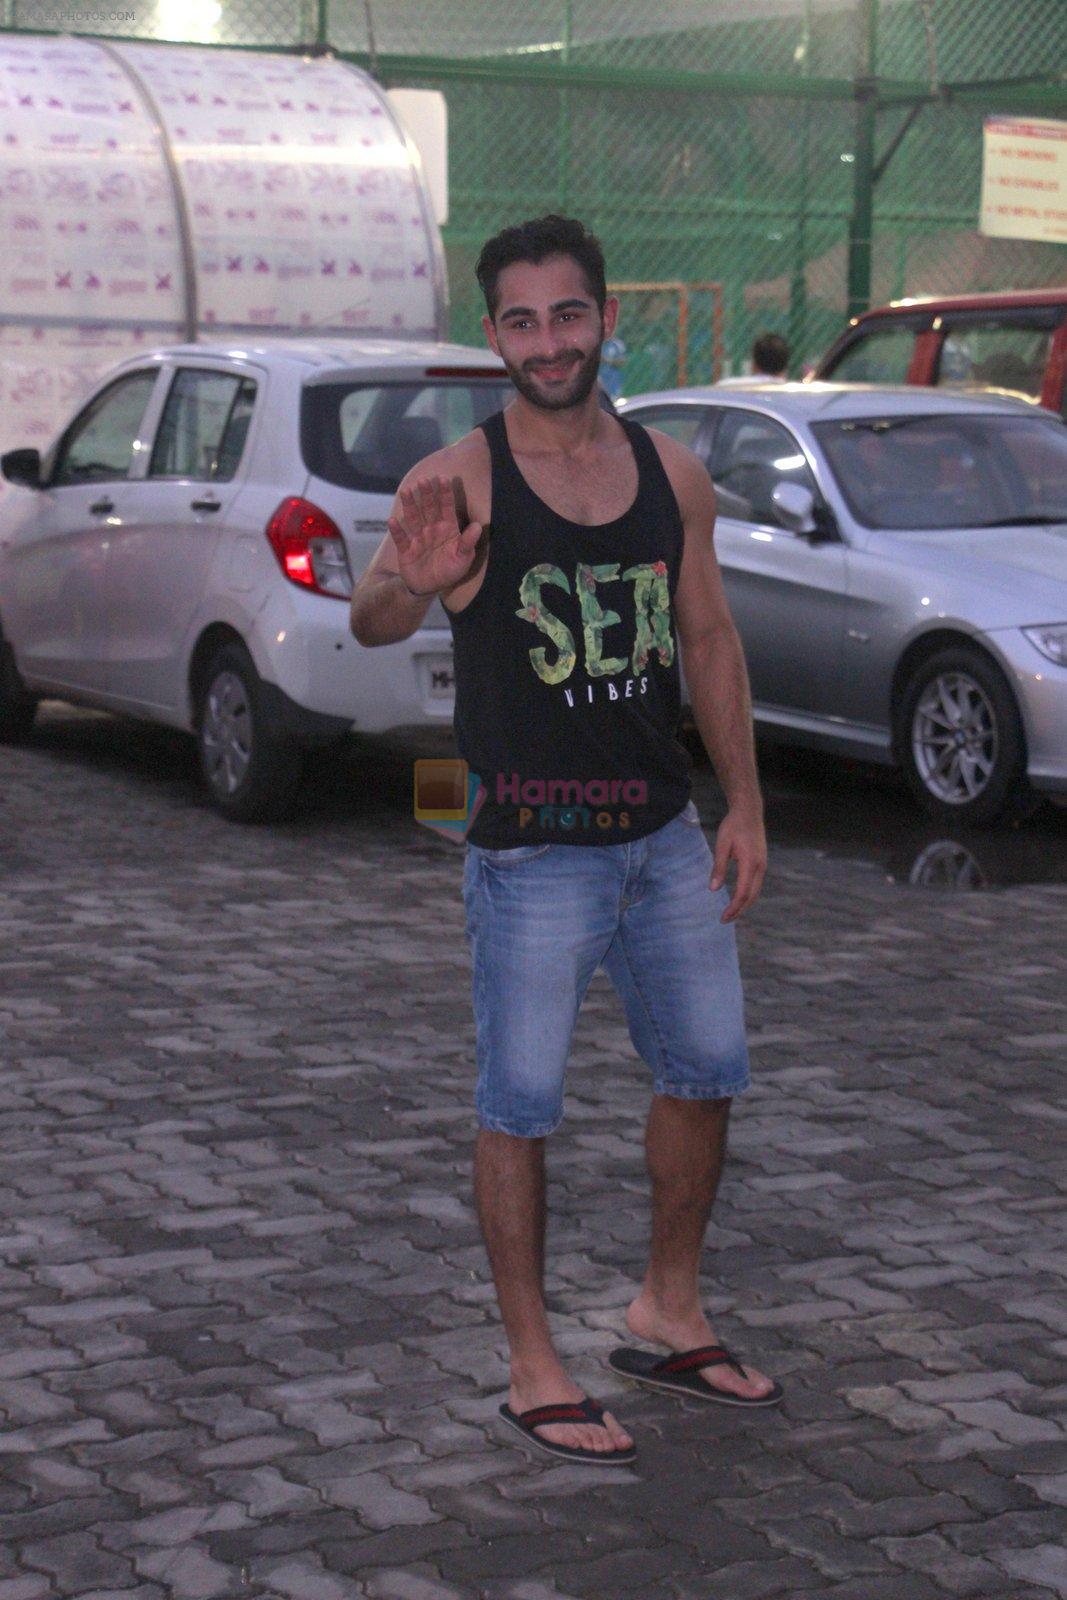 Armaan Jain snapped at soccer match in Mumbai on 14th Aug 2016